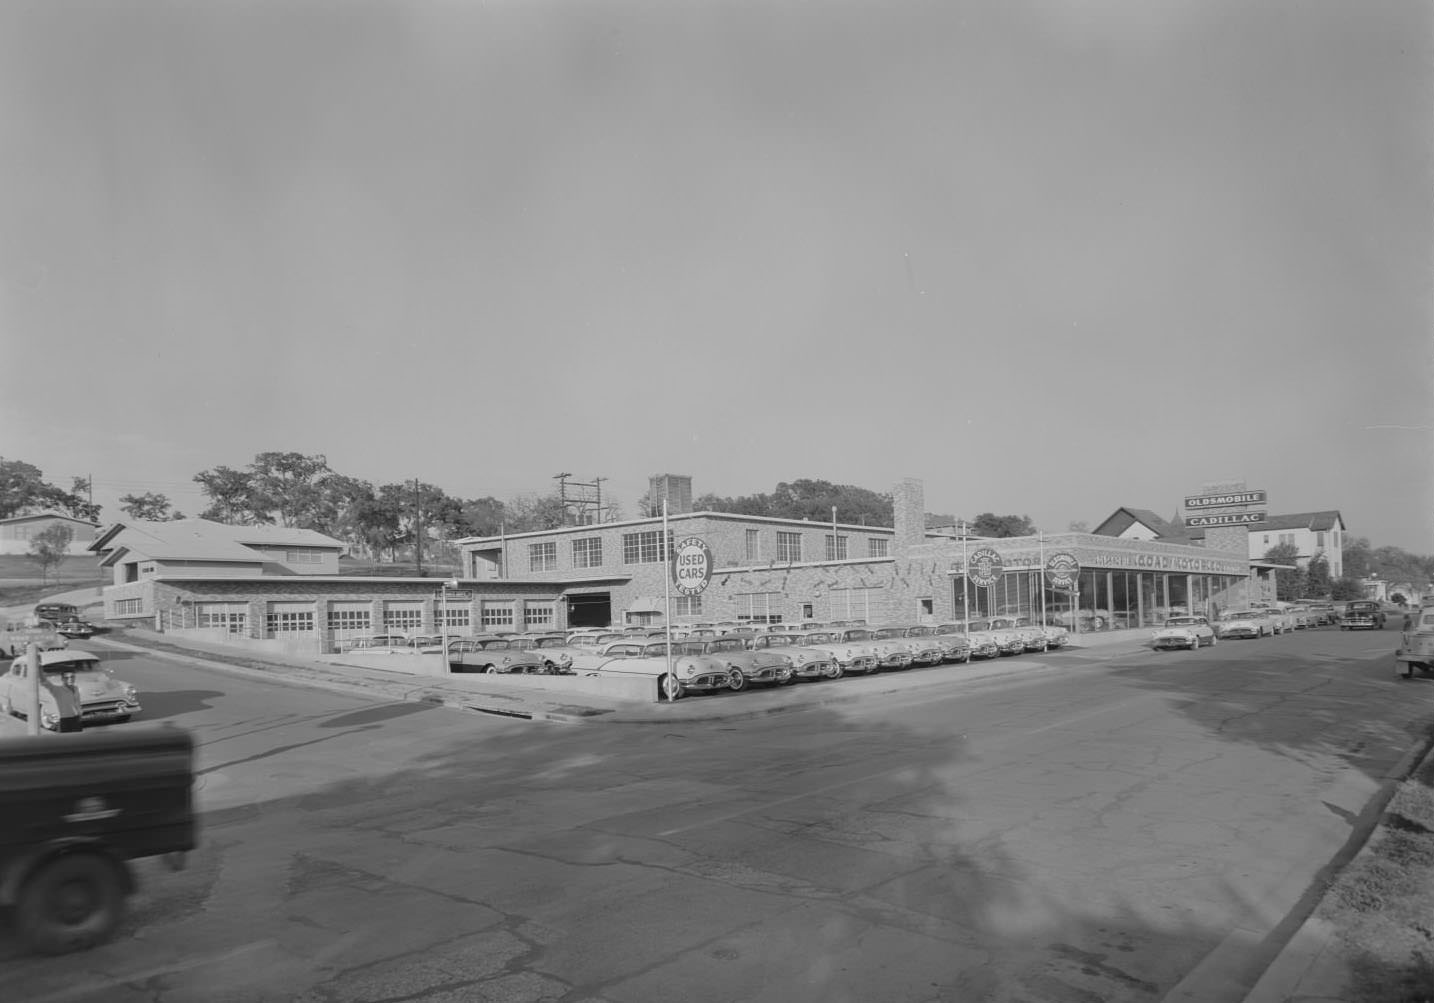 View of Goad Motor Company showroom and lot with cars, 1956